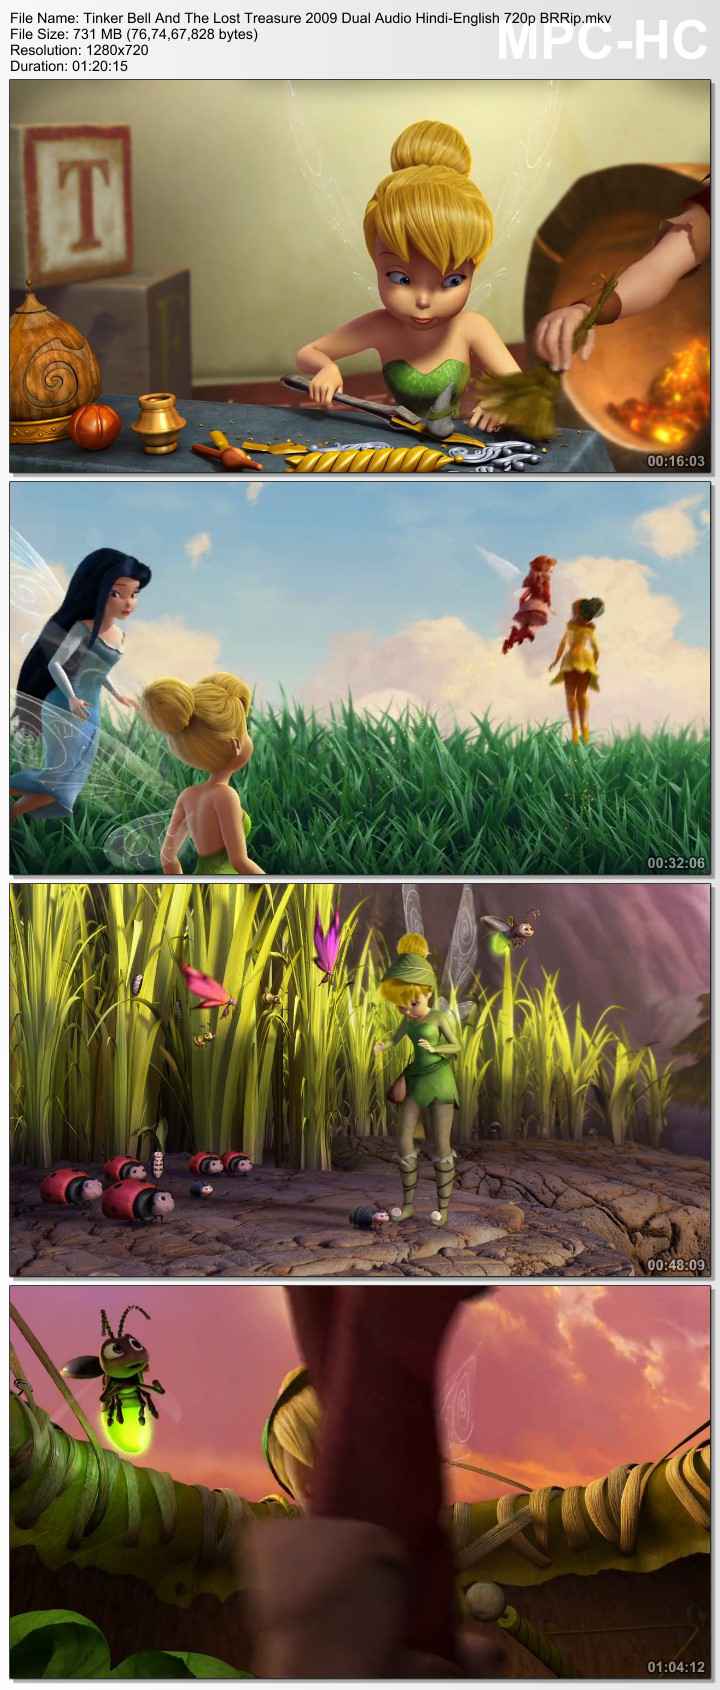 Tinker Bell And The Lost Treasure 2009 Hindi-English Dubbed x264 BRRip 480p [256MB] | 720p [731MB]